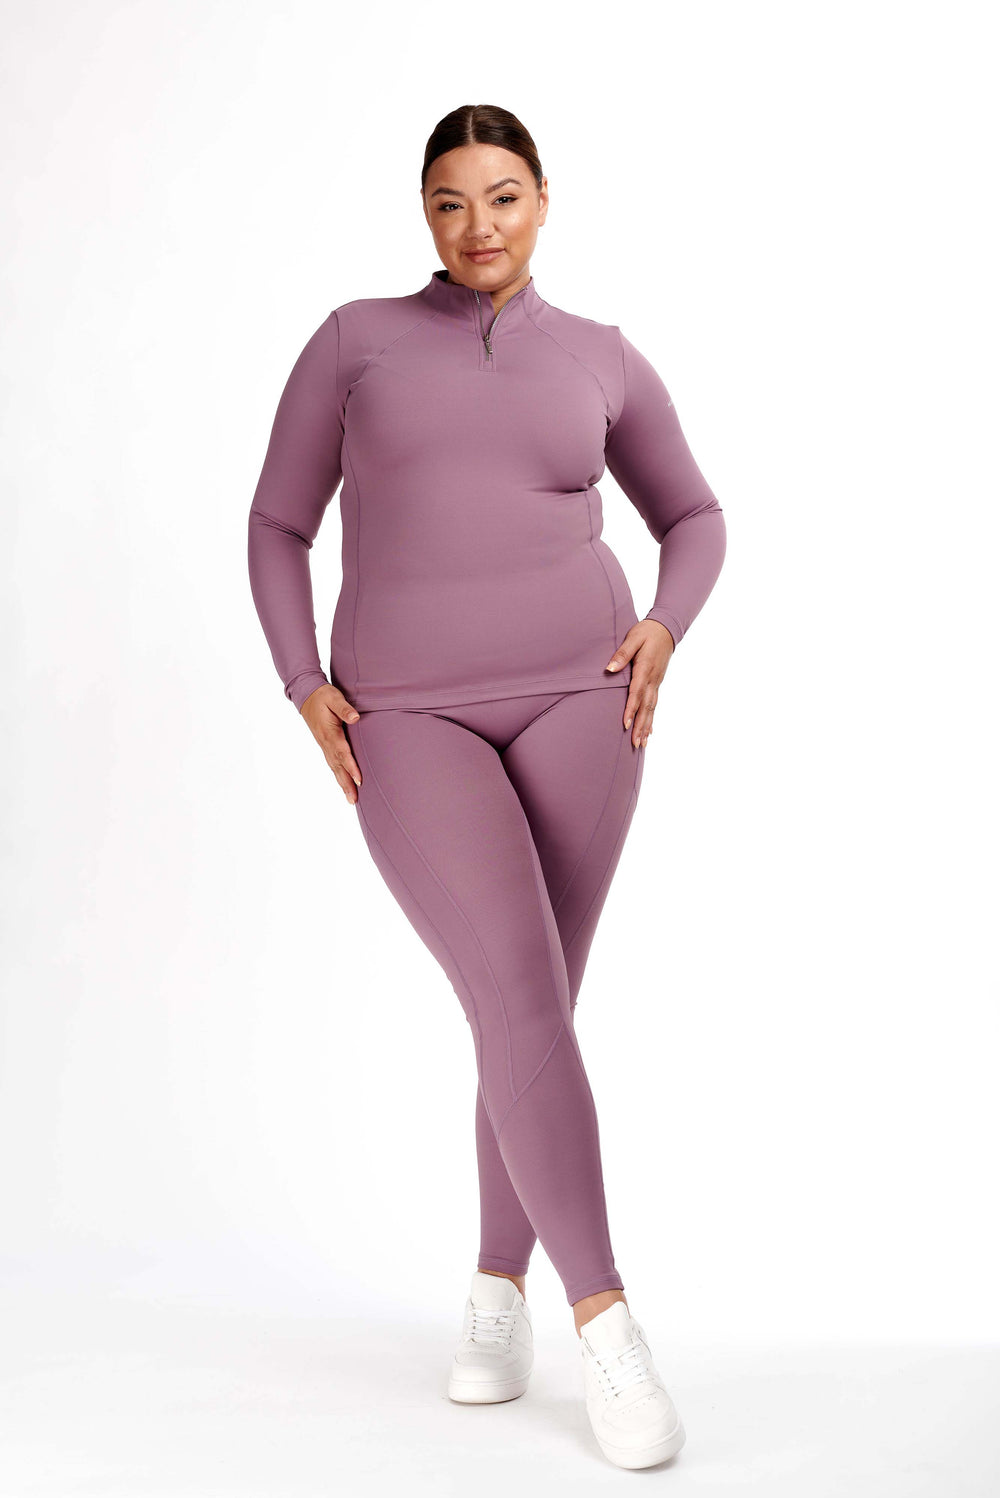 Woman in purple horse riding tights and matching long-sleeve top.